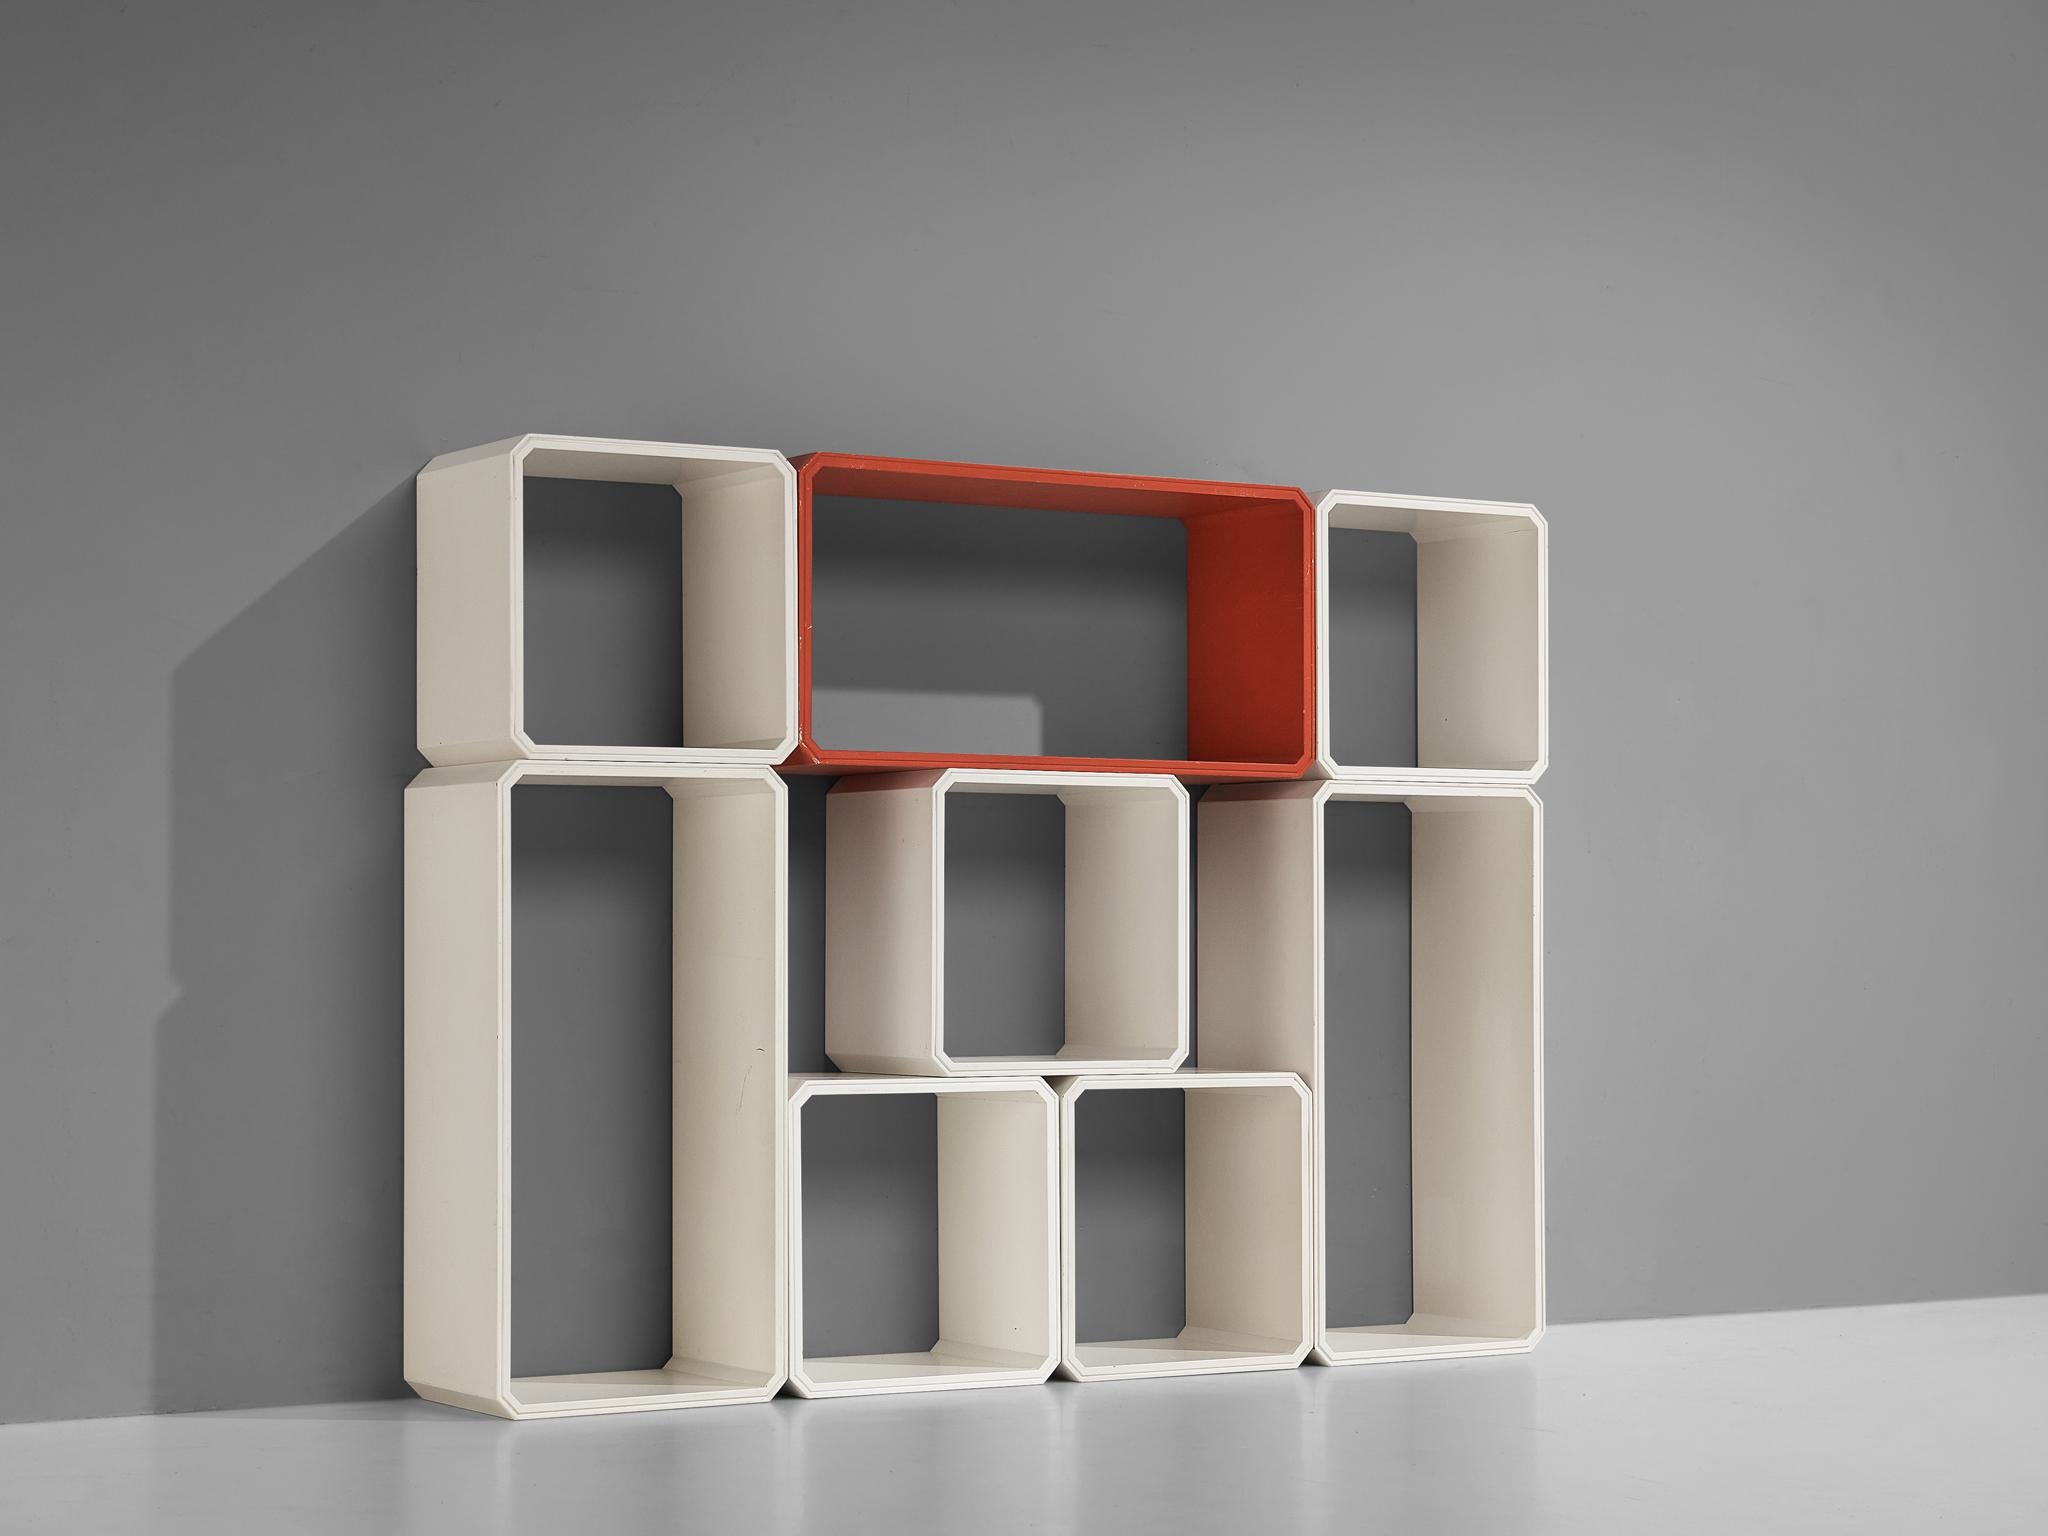 Mid-20th Century Italian Modular Cabinet in White and Red Lacquered Wood For Sale